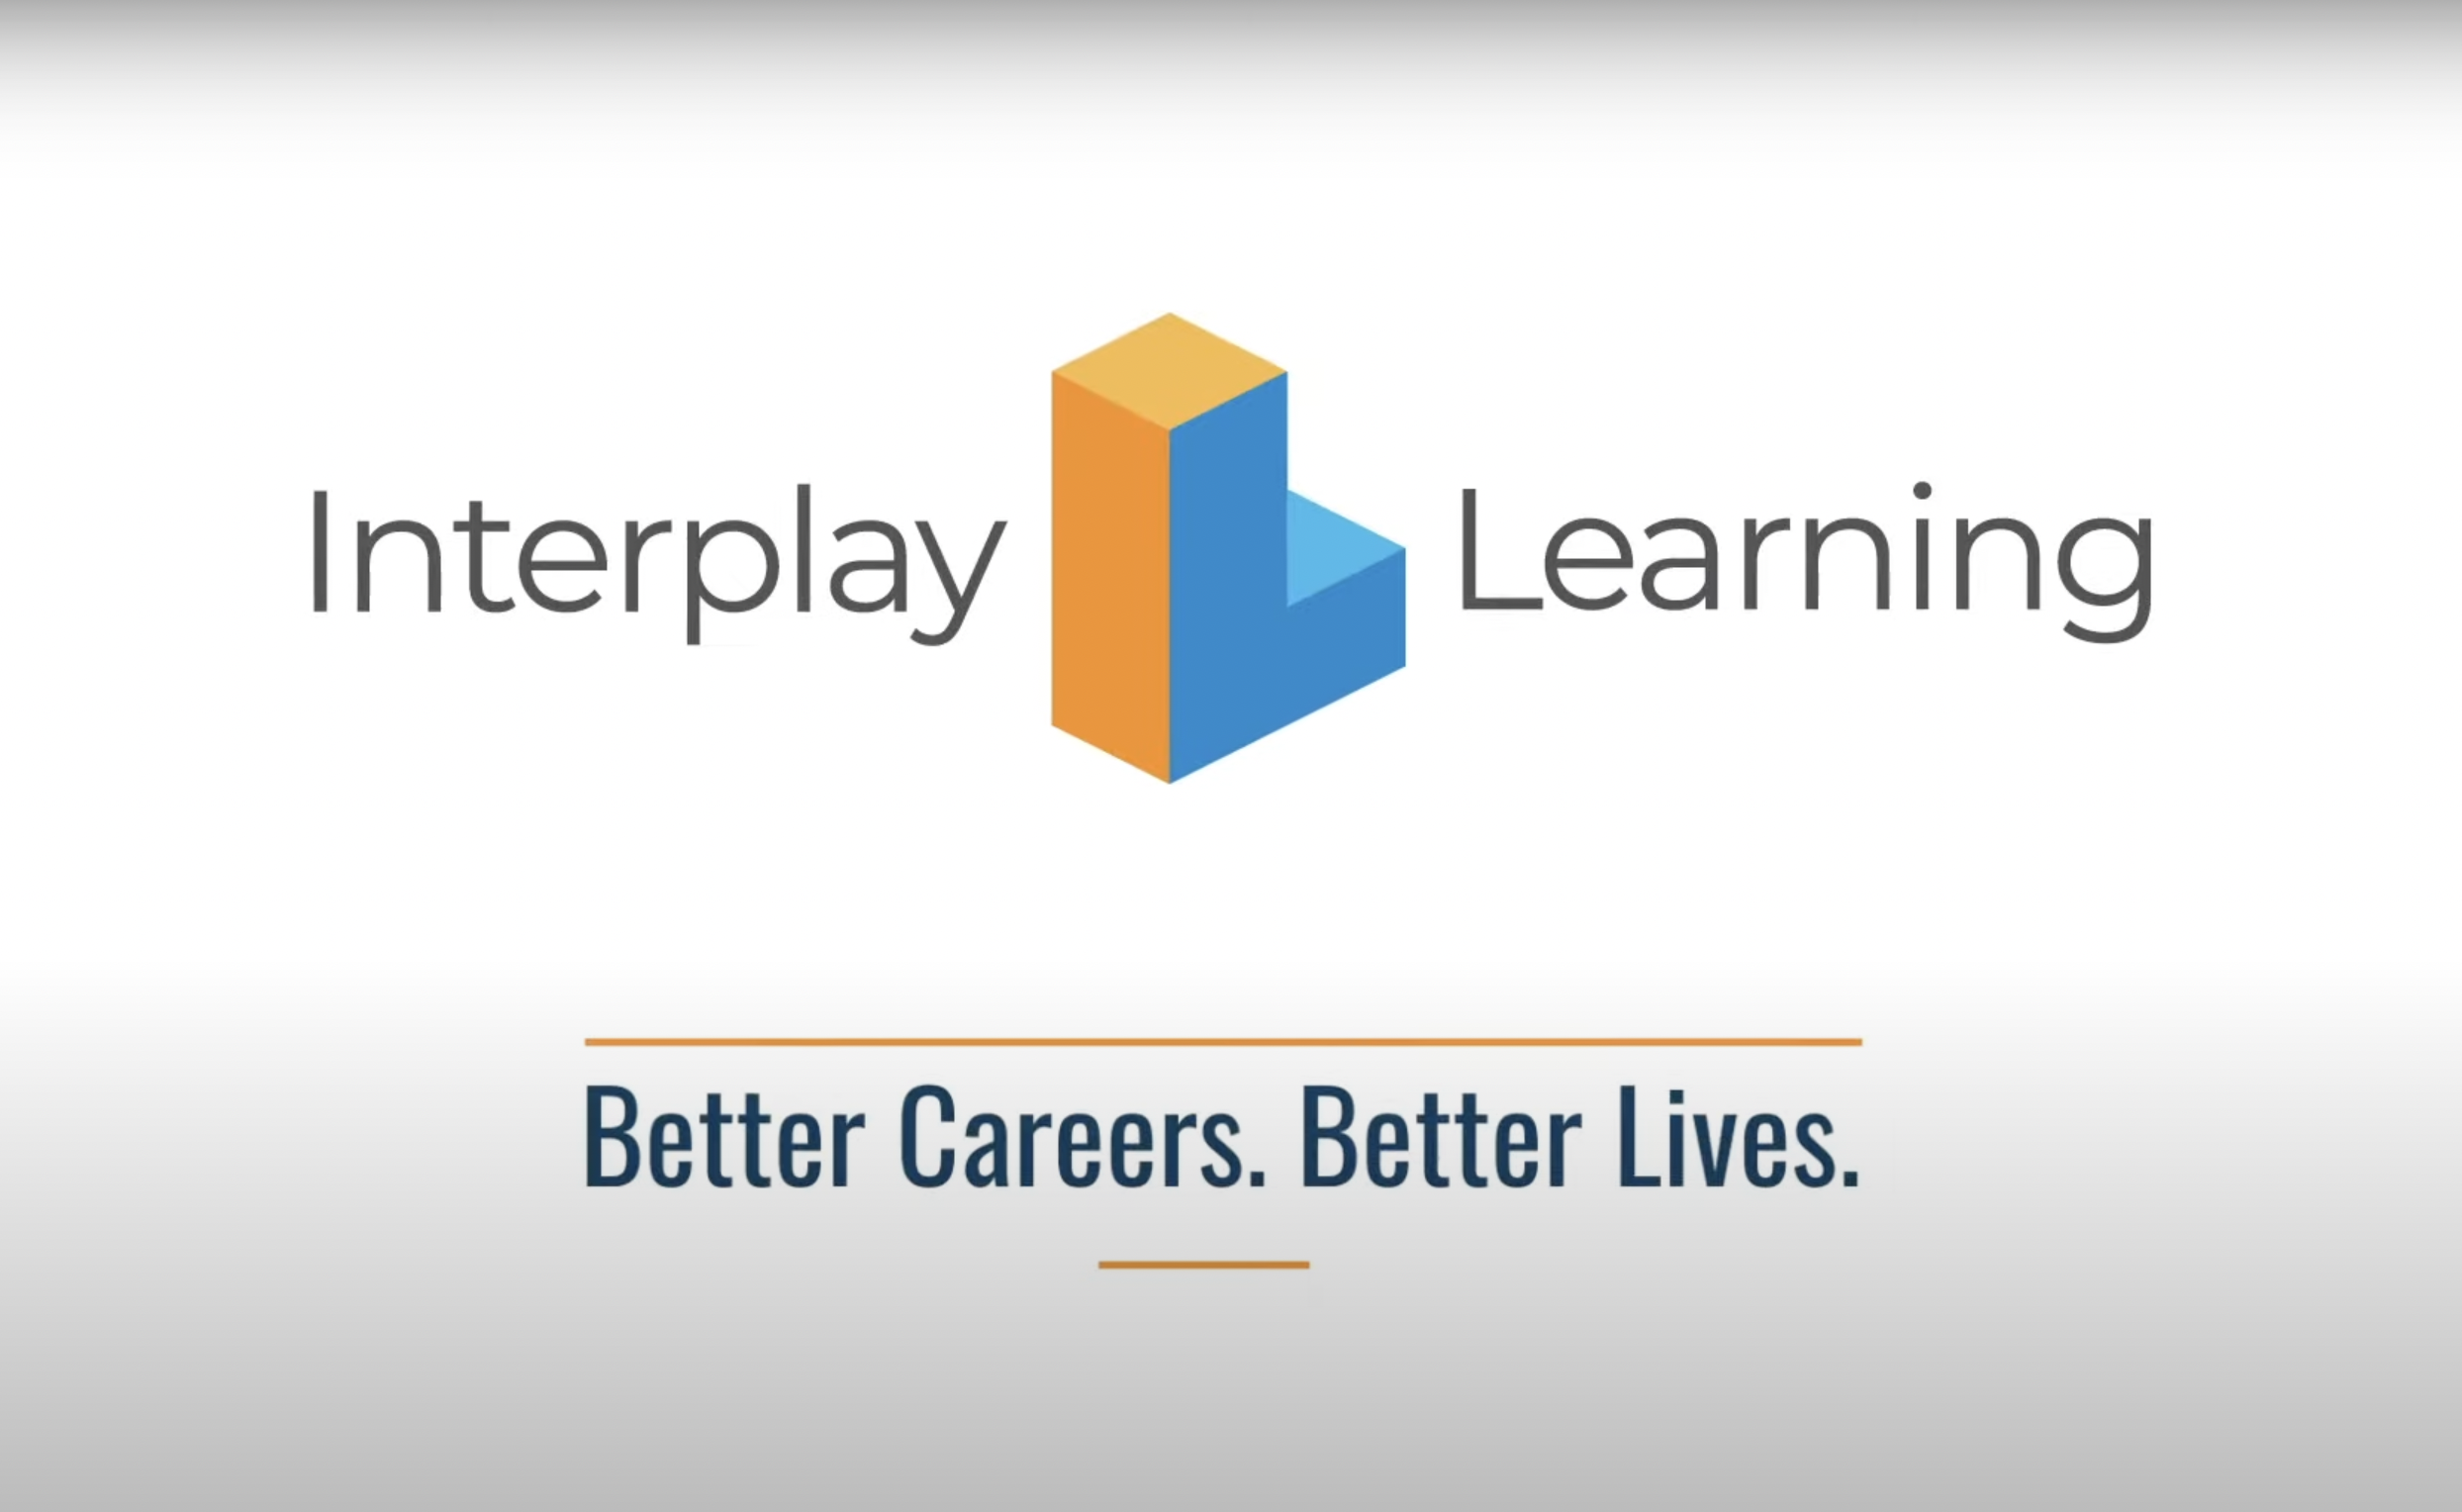 The Interplay Learning logo with the words Better Careers, Better Lives